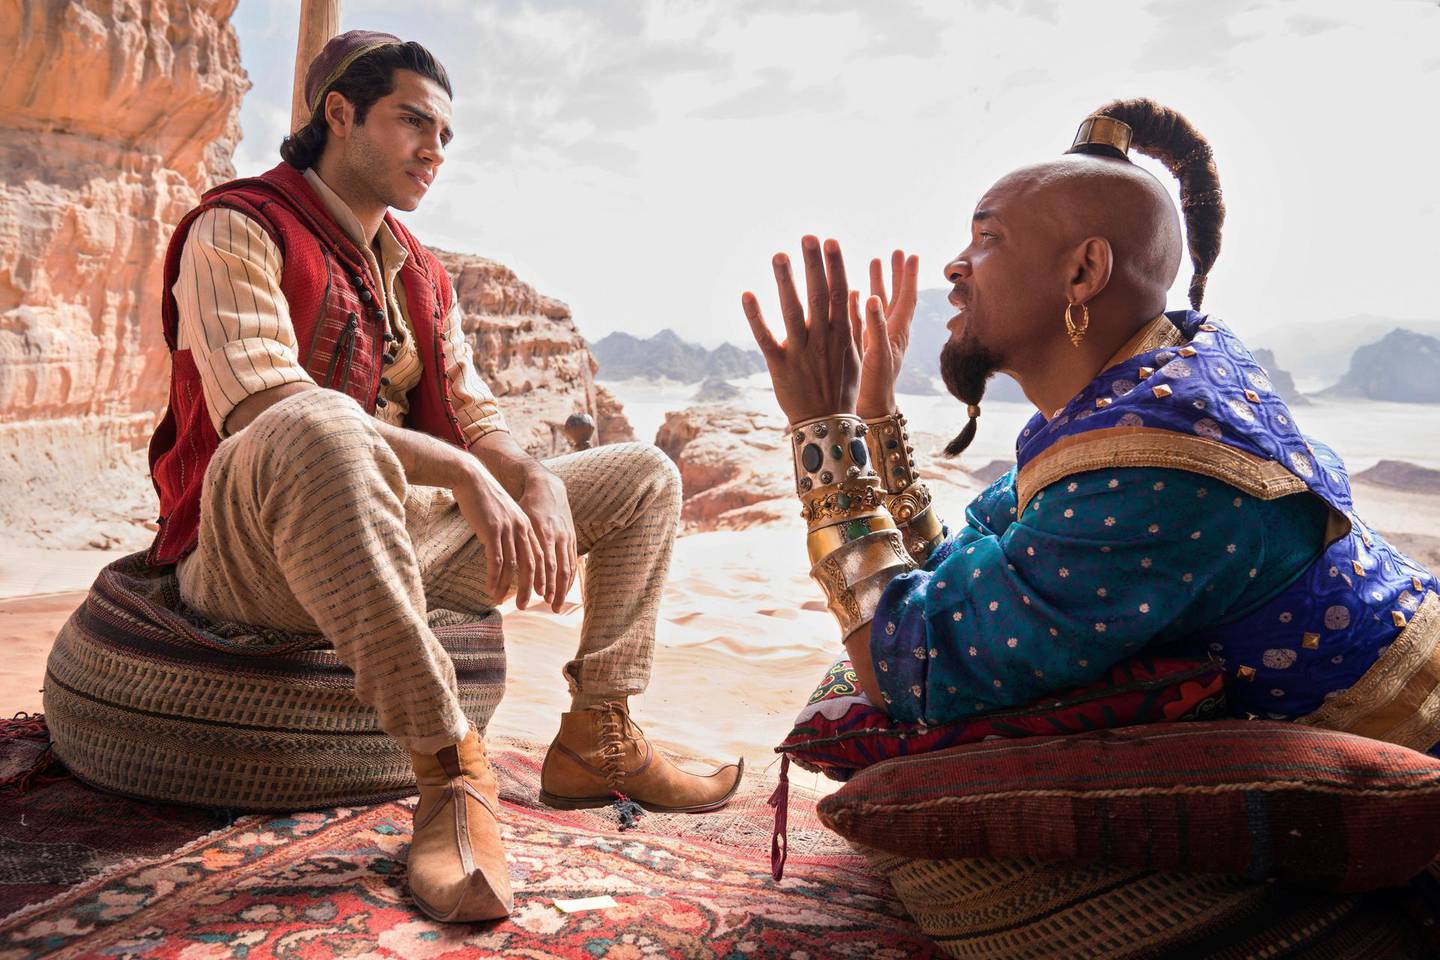 This image released by Disney shows Mena Massoud as Aladdin, left, and Will Smith as Genie in Disney's live-action adaptation of the 1992 animated classic "Aladdin." (Daniel Smith/Disney via AP)